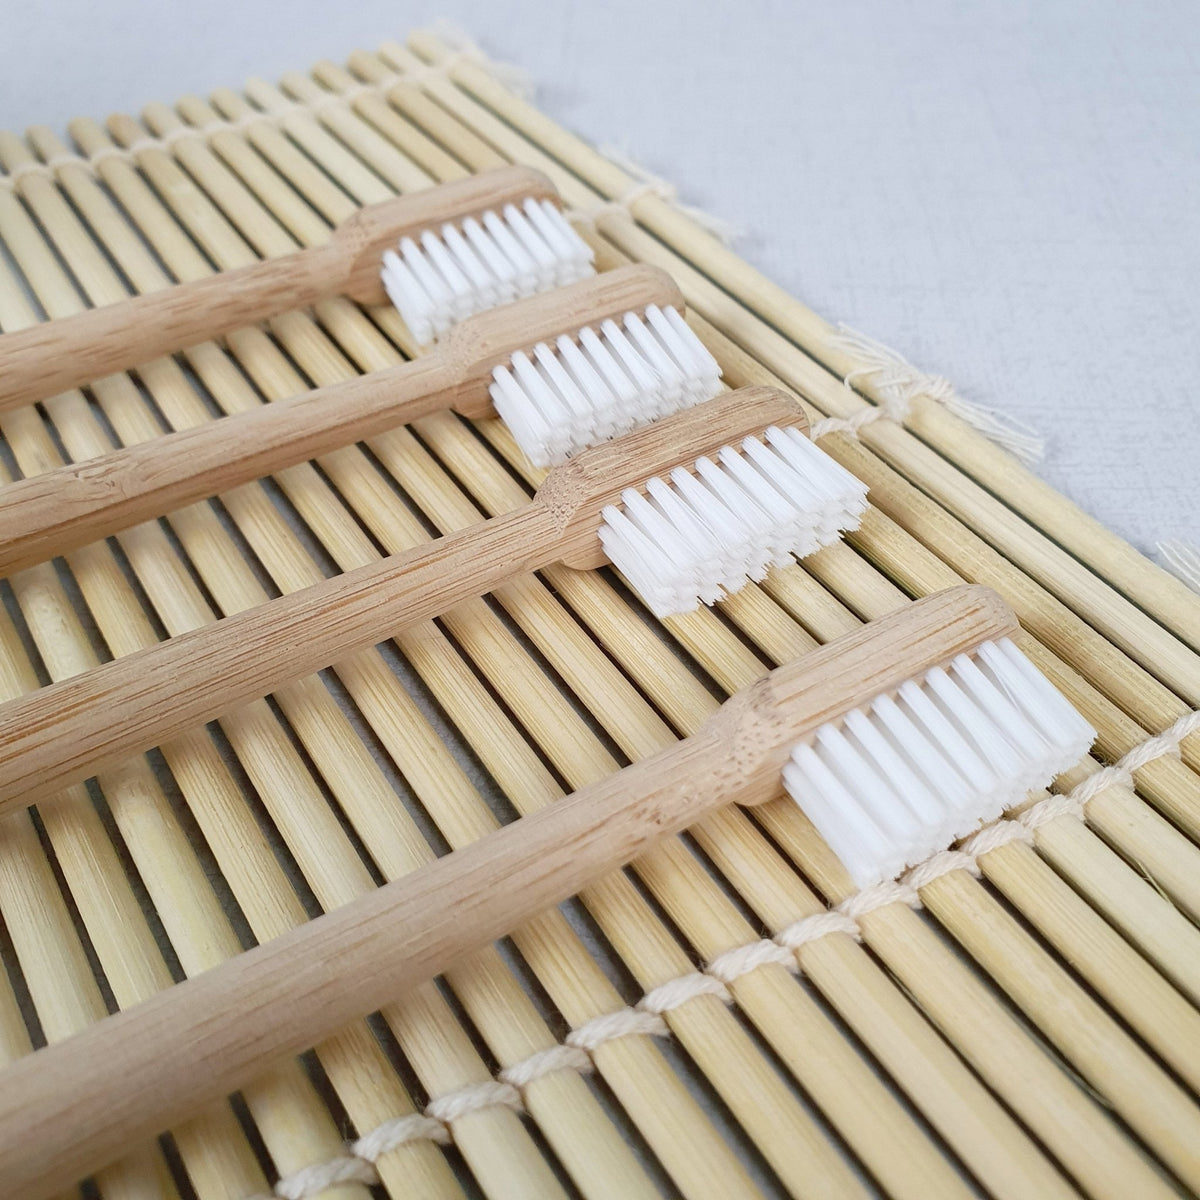 Bamboo Toothbrushes with Dark Green Tips - Set of 4 Family Pack